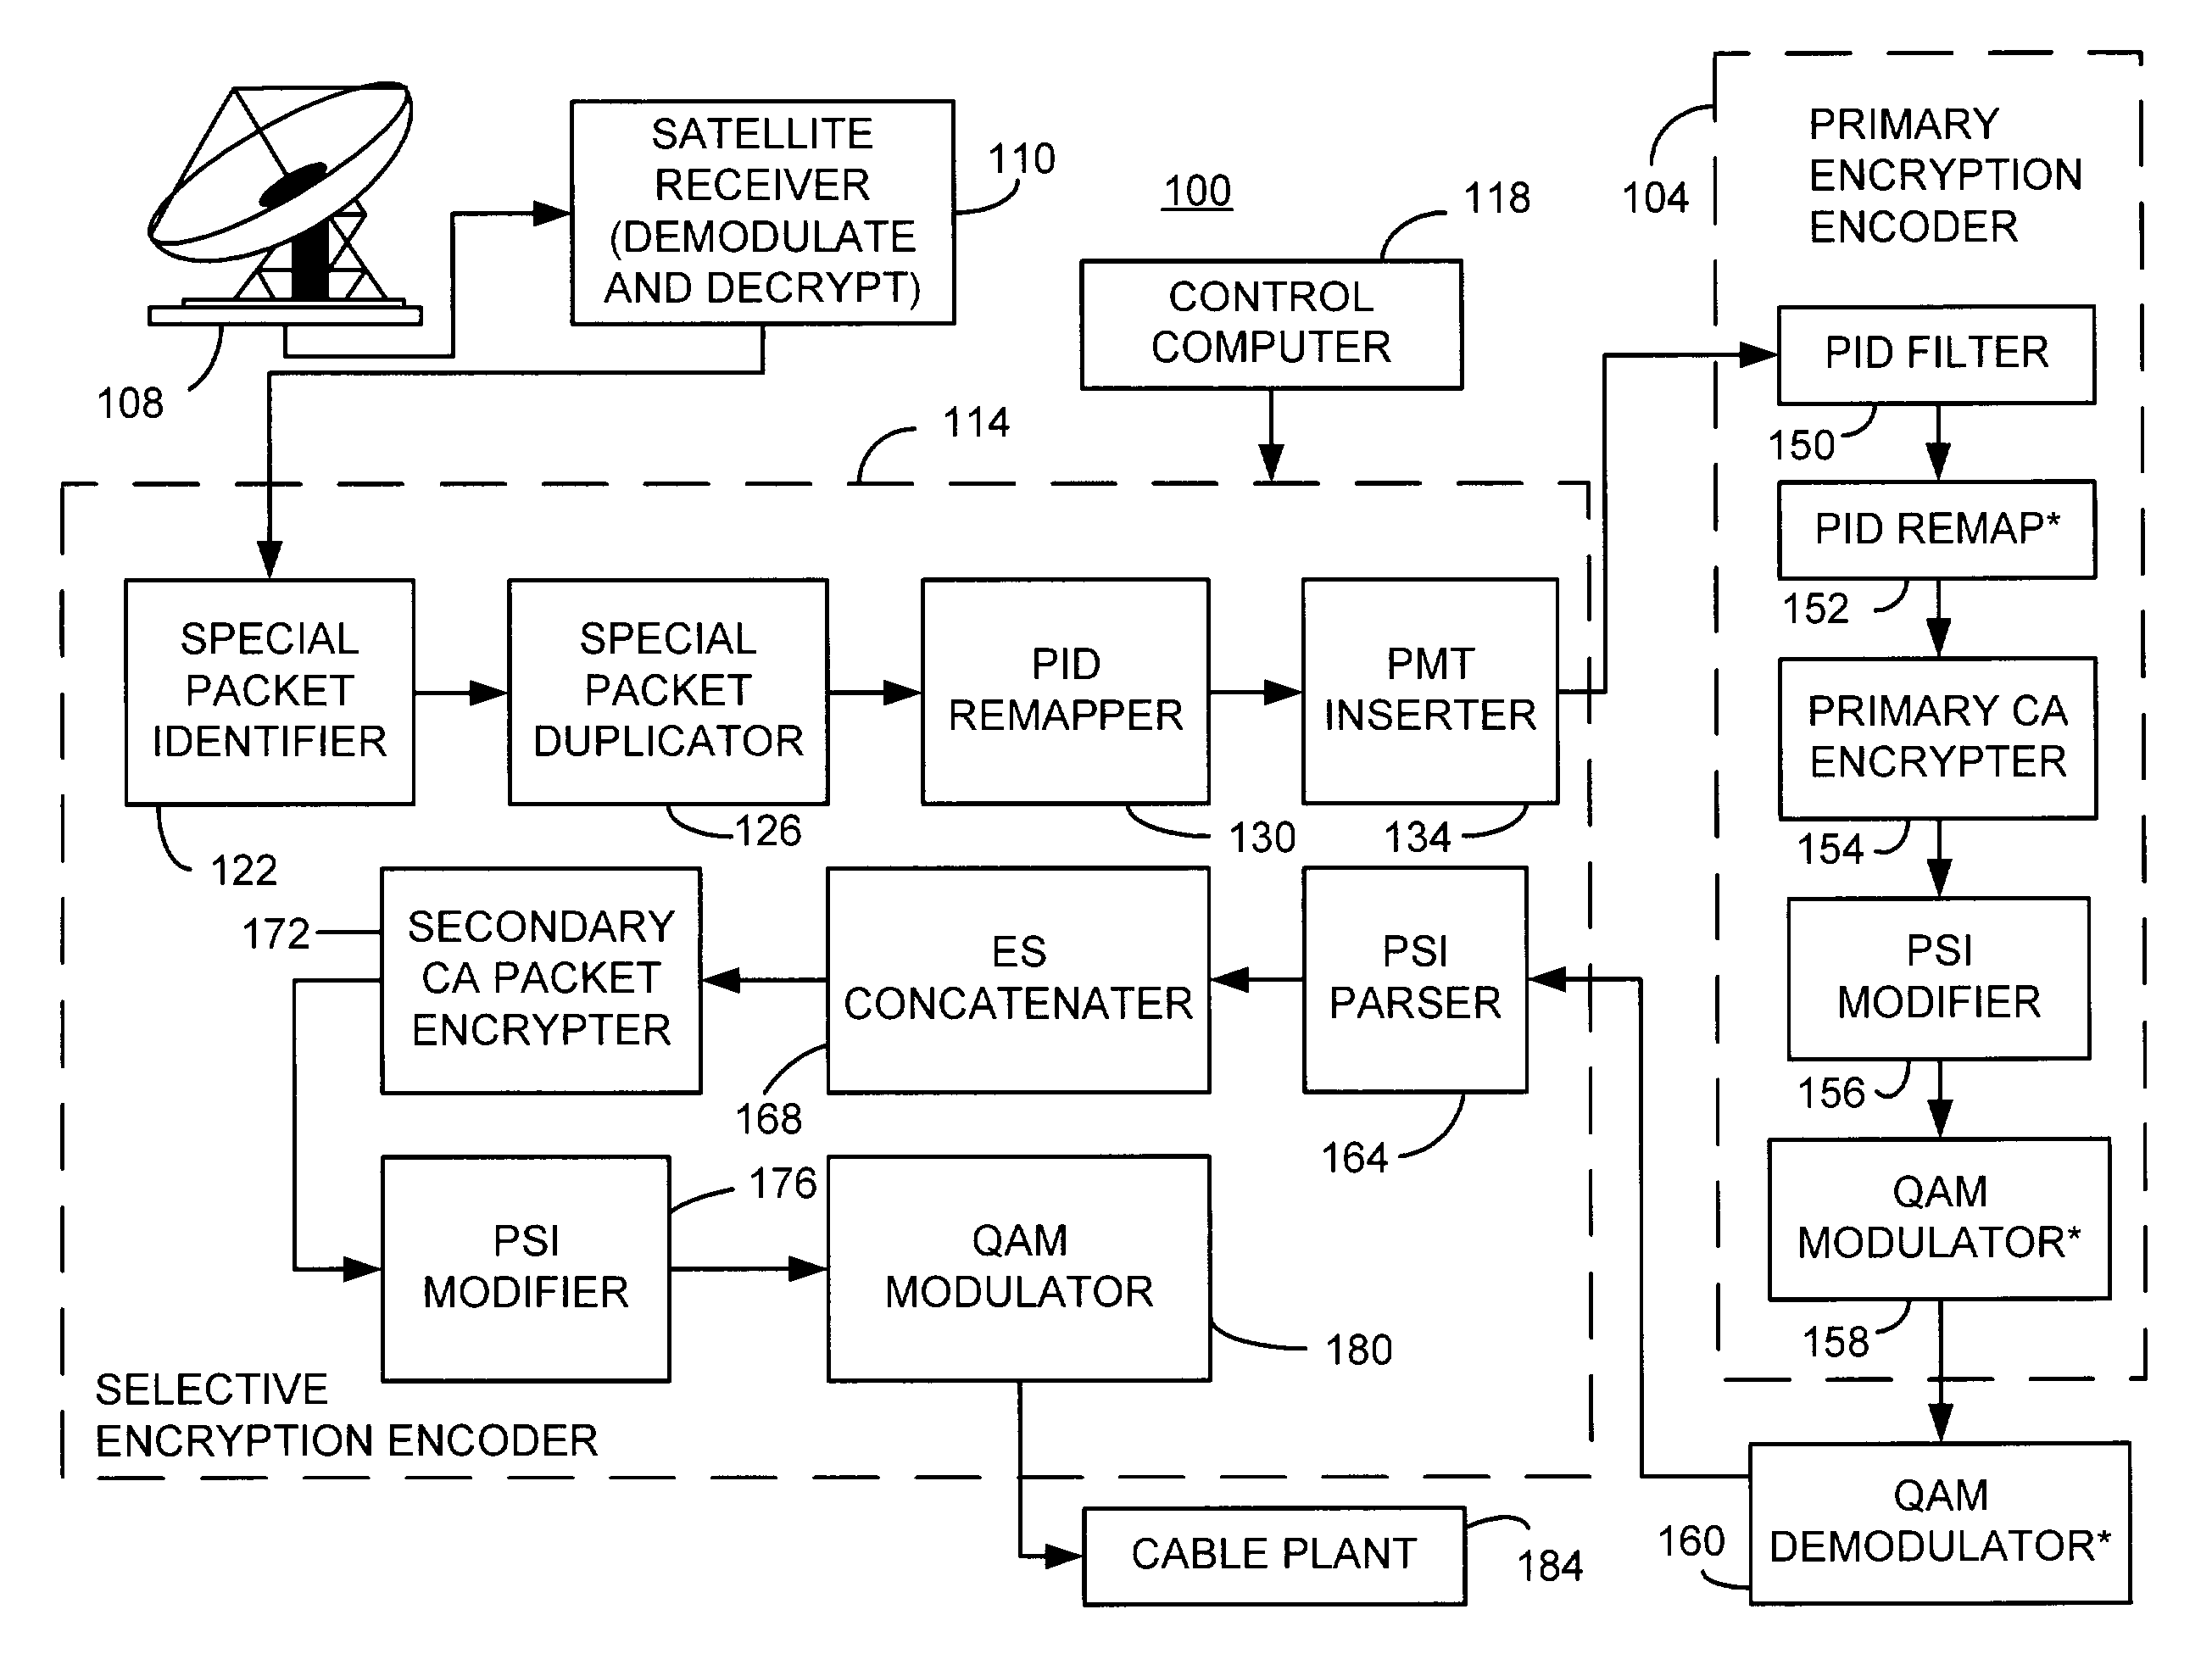 Encryption and content control in a digital broadcast system